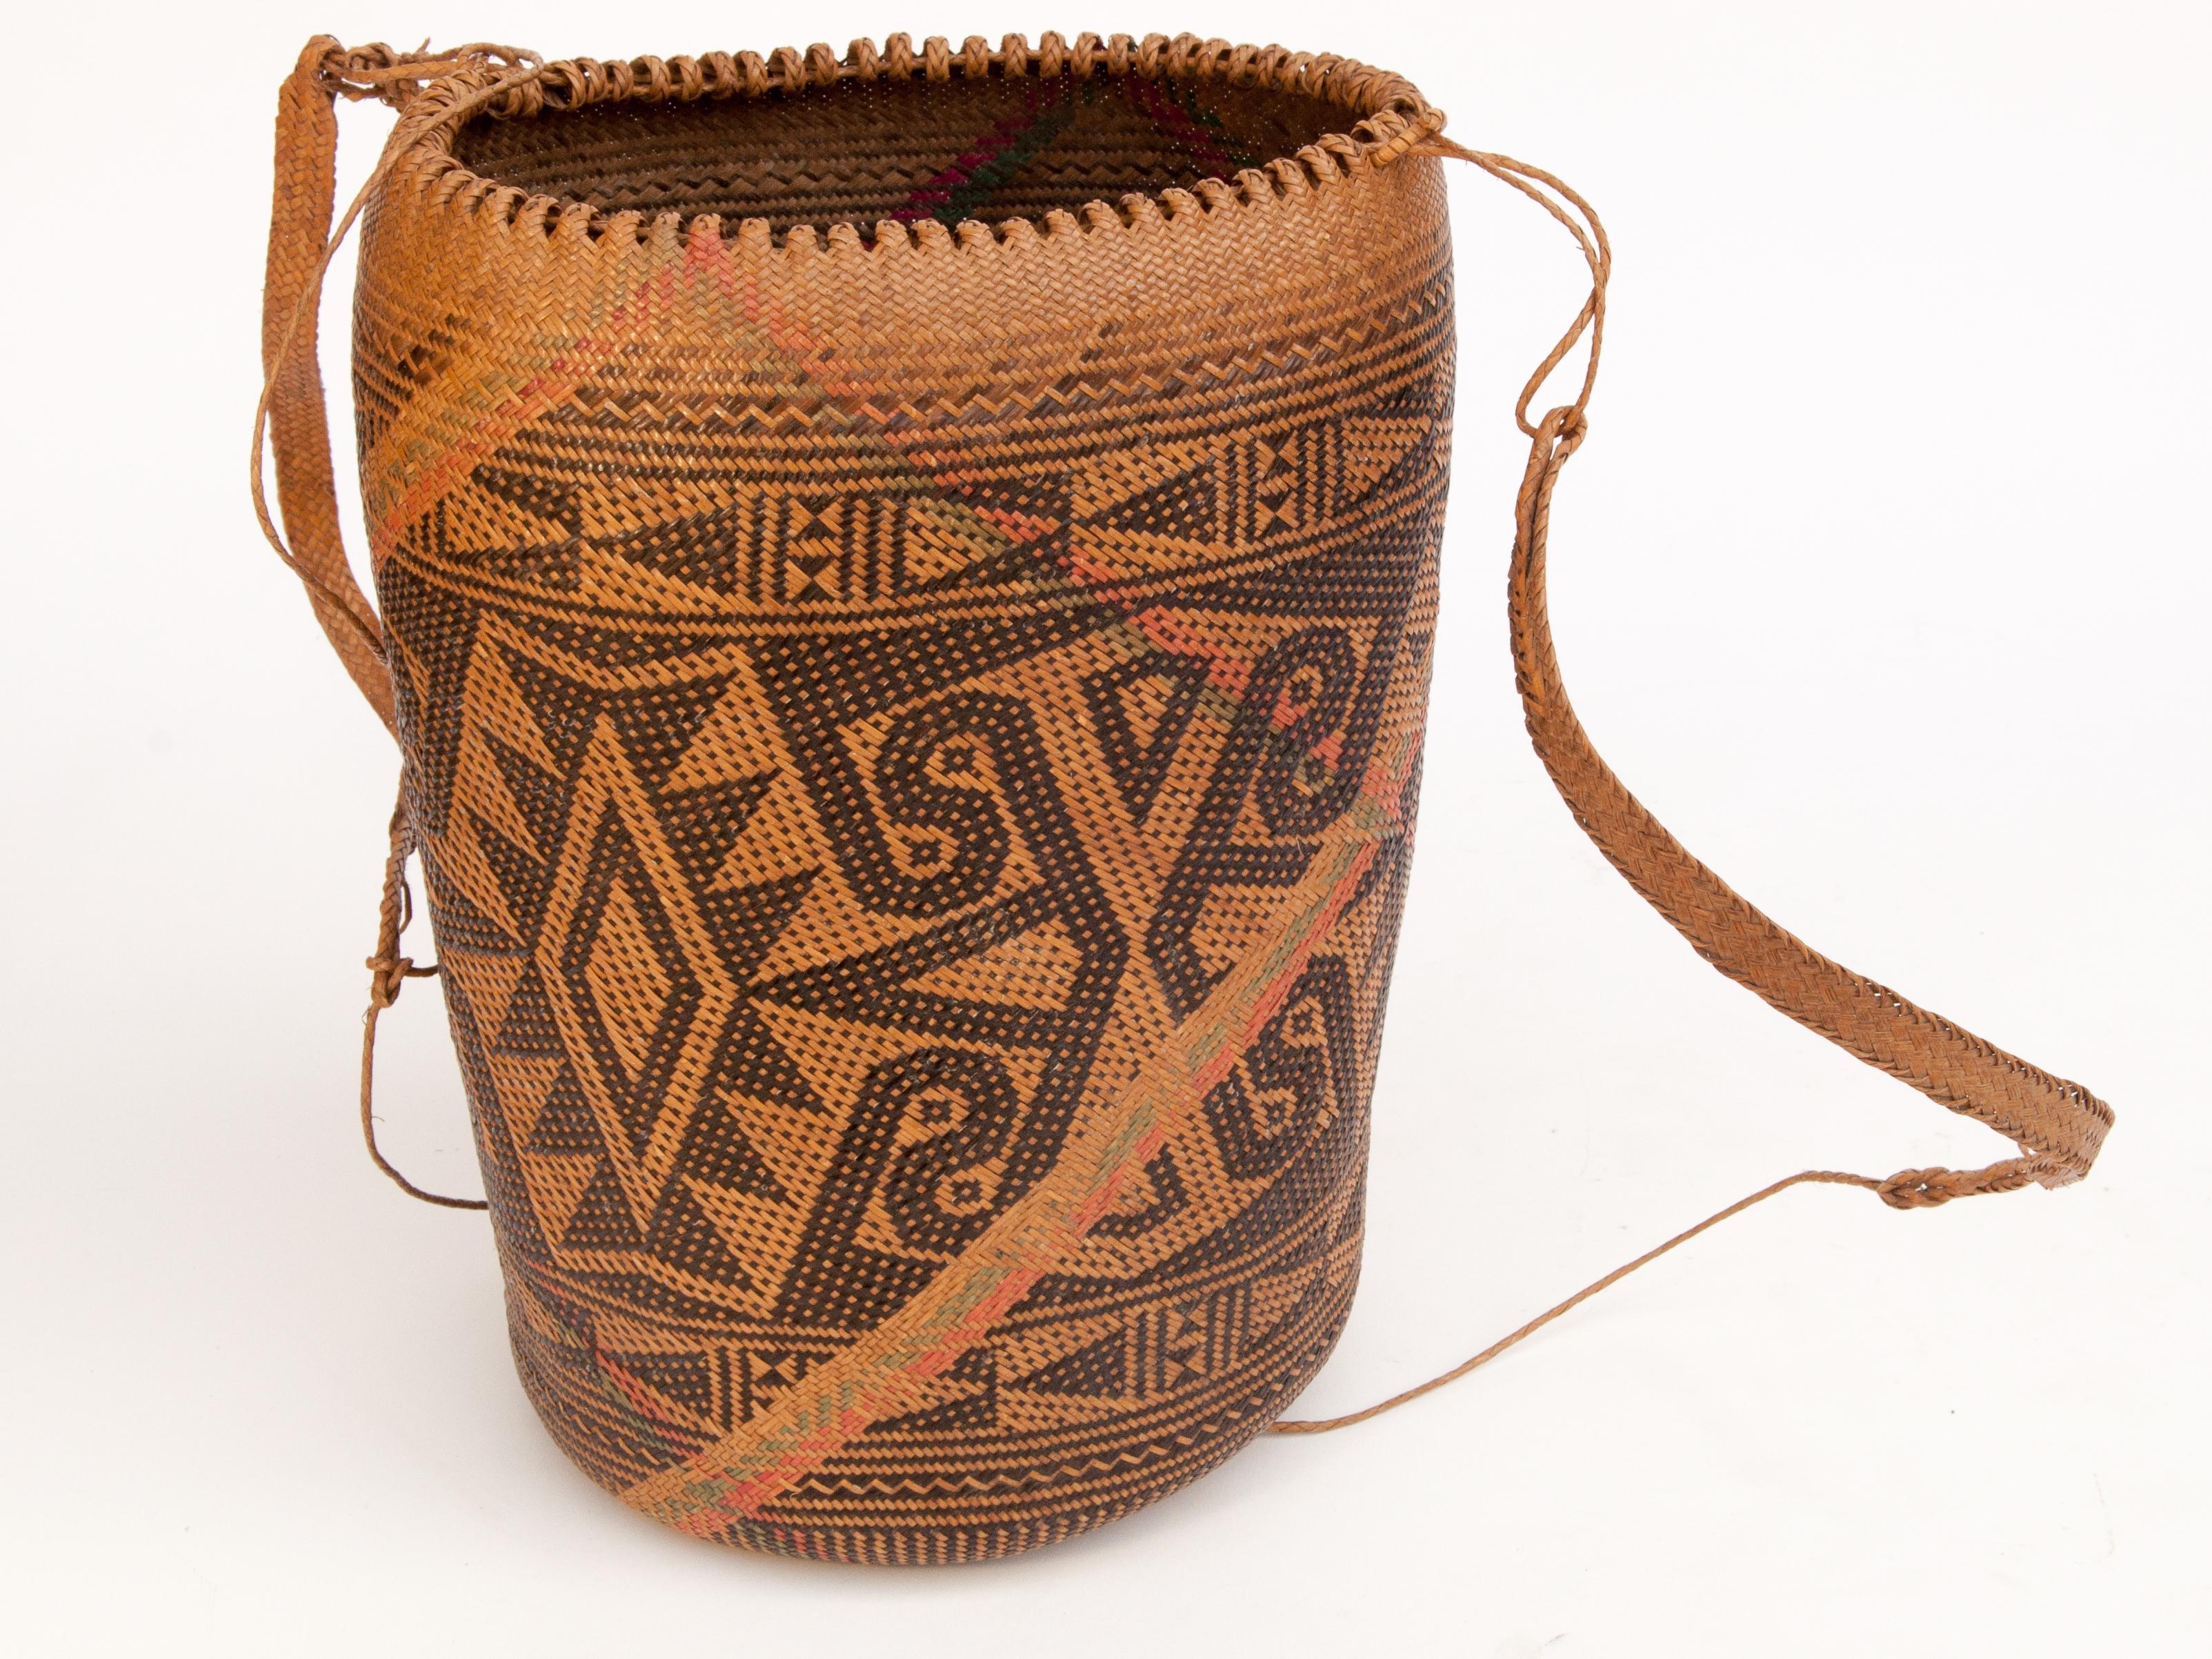 Rattan drawstring shoulder bag basket. Punan of Borneo, late 20th century.
This thoroughly utilitarian shoulder basket comes from the Punan of Borneo. Very cleanly woven of rattan with a geometric design, it is pliable and extremely durable. The